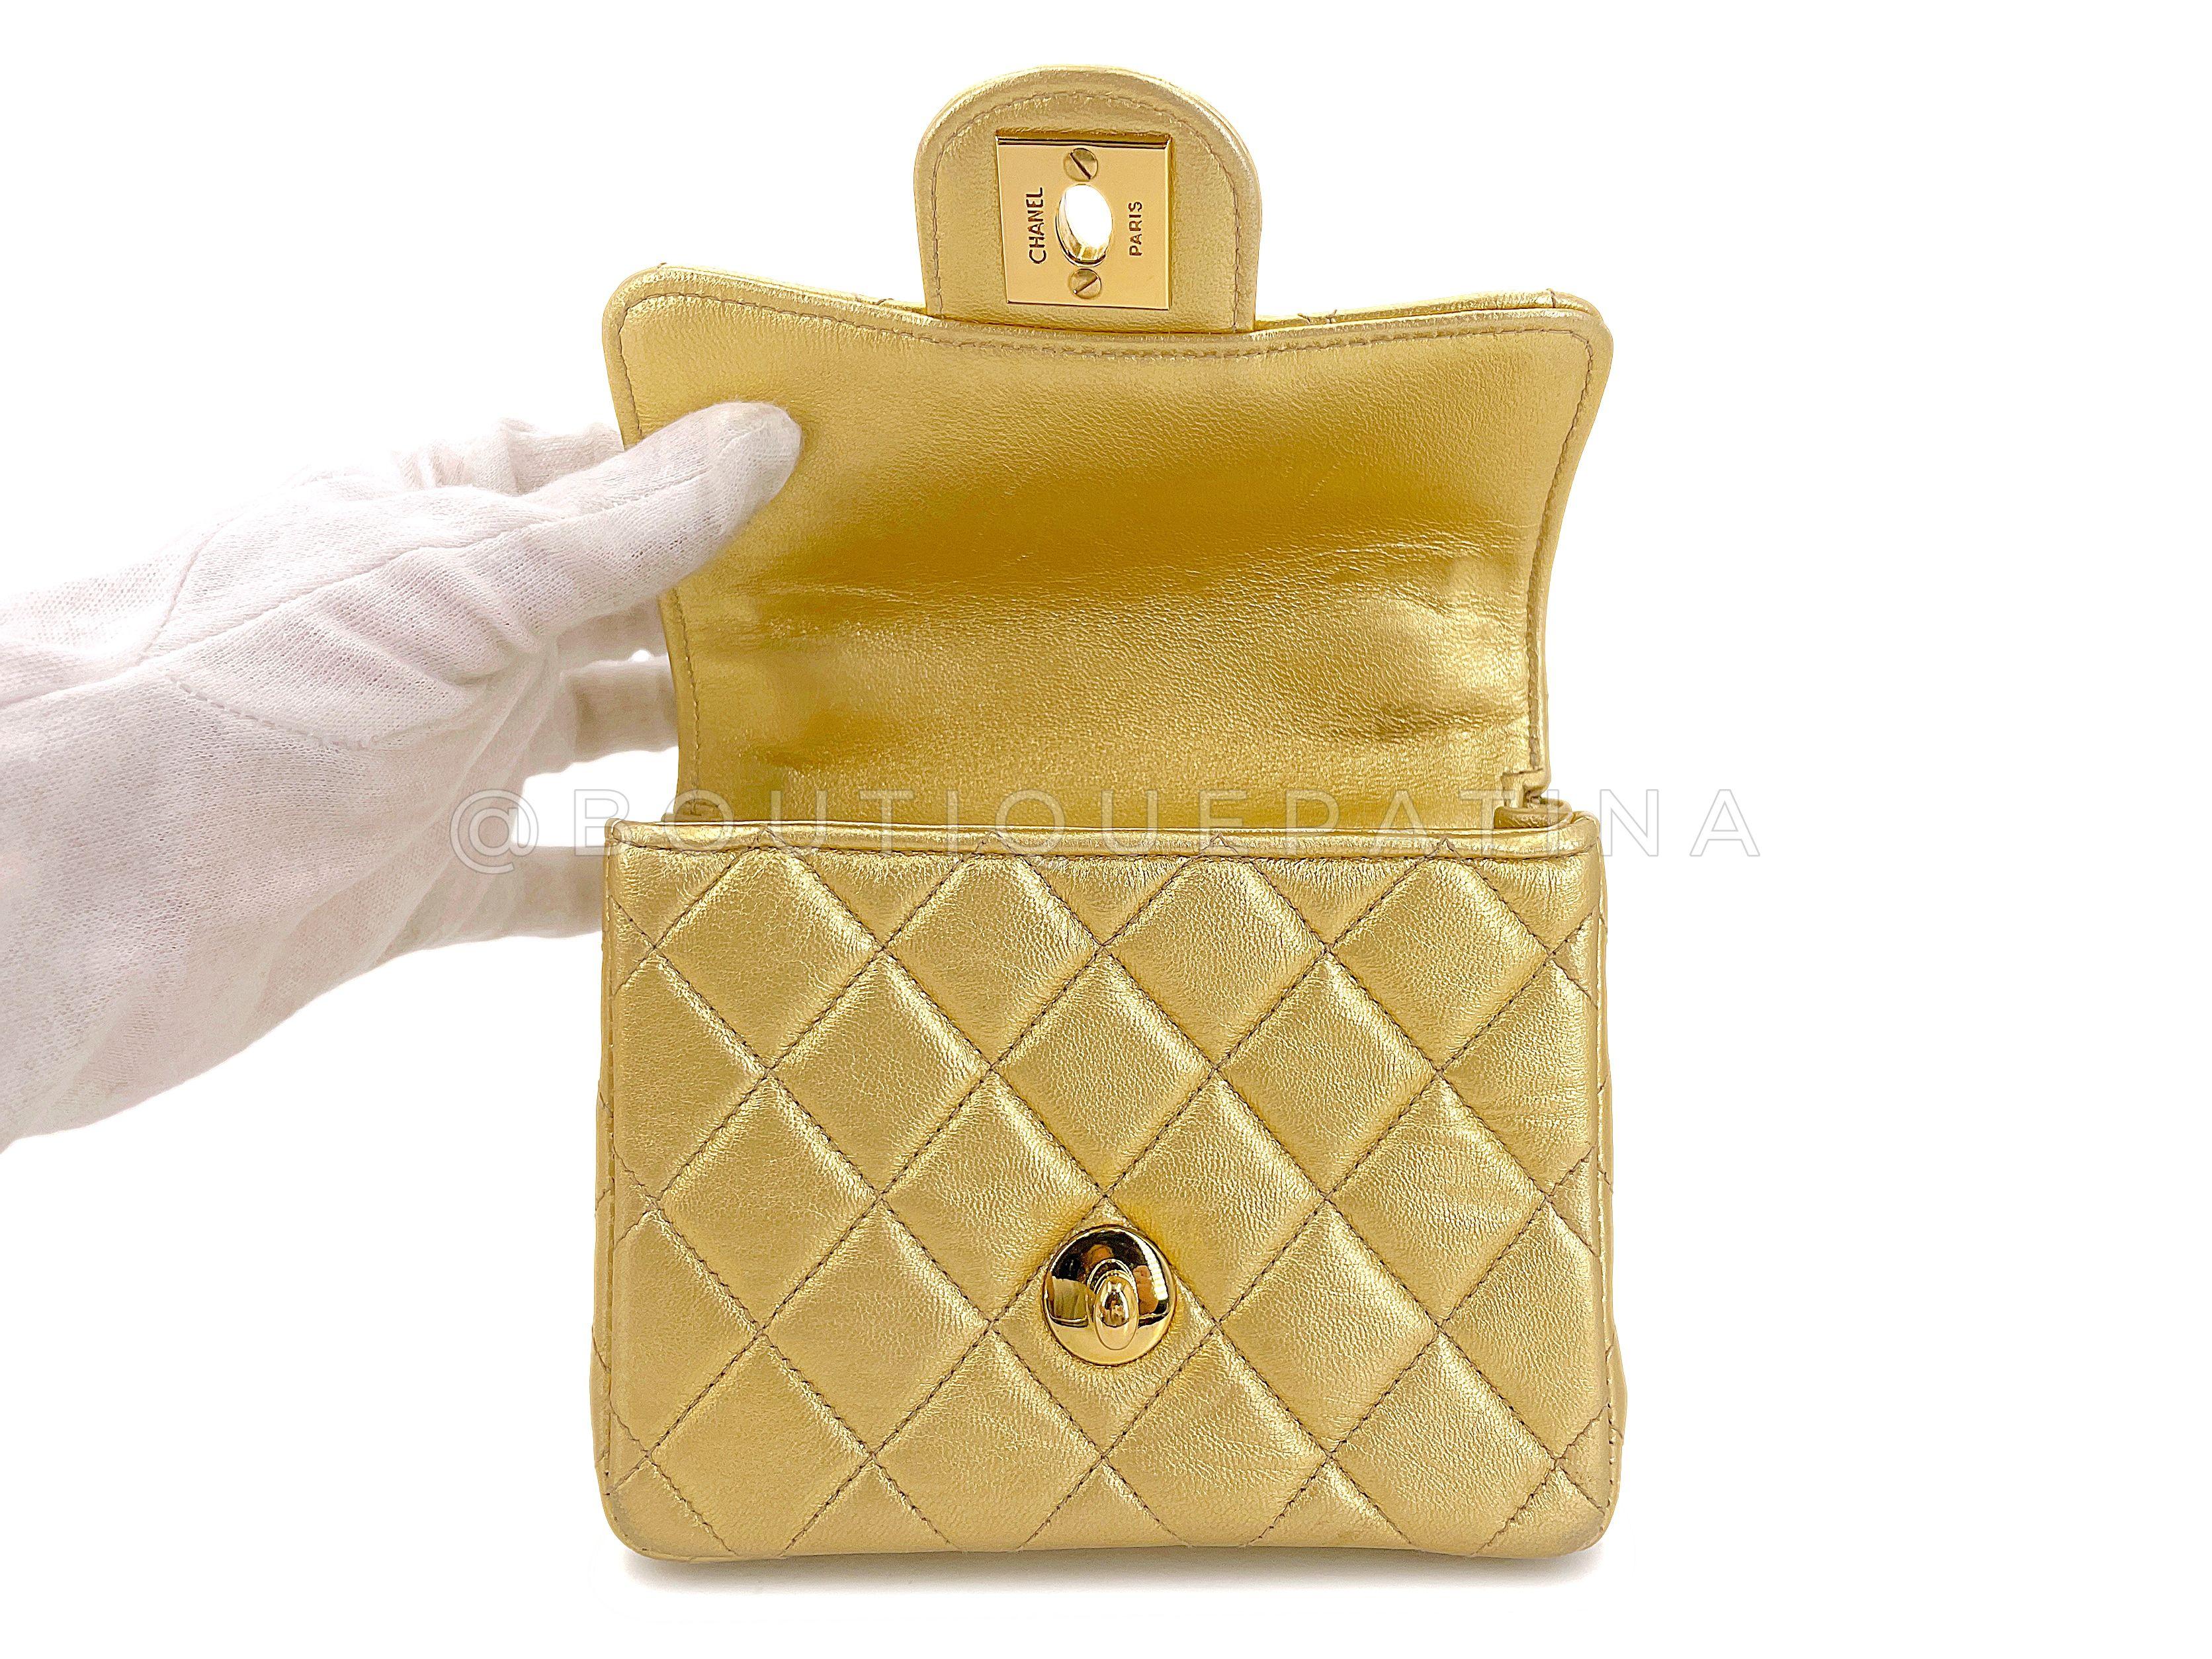 Chanel 1994 Vintage Gold “Child” Extra Square Mini Kelly Bag 67404 For Sale 5